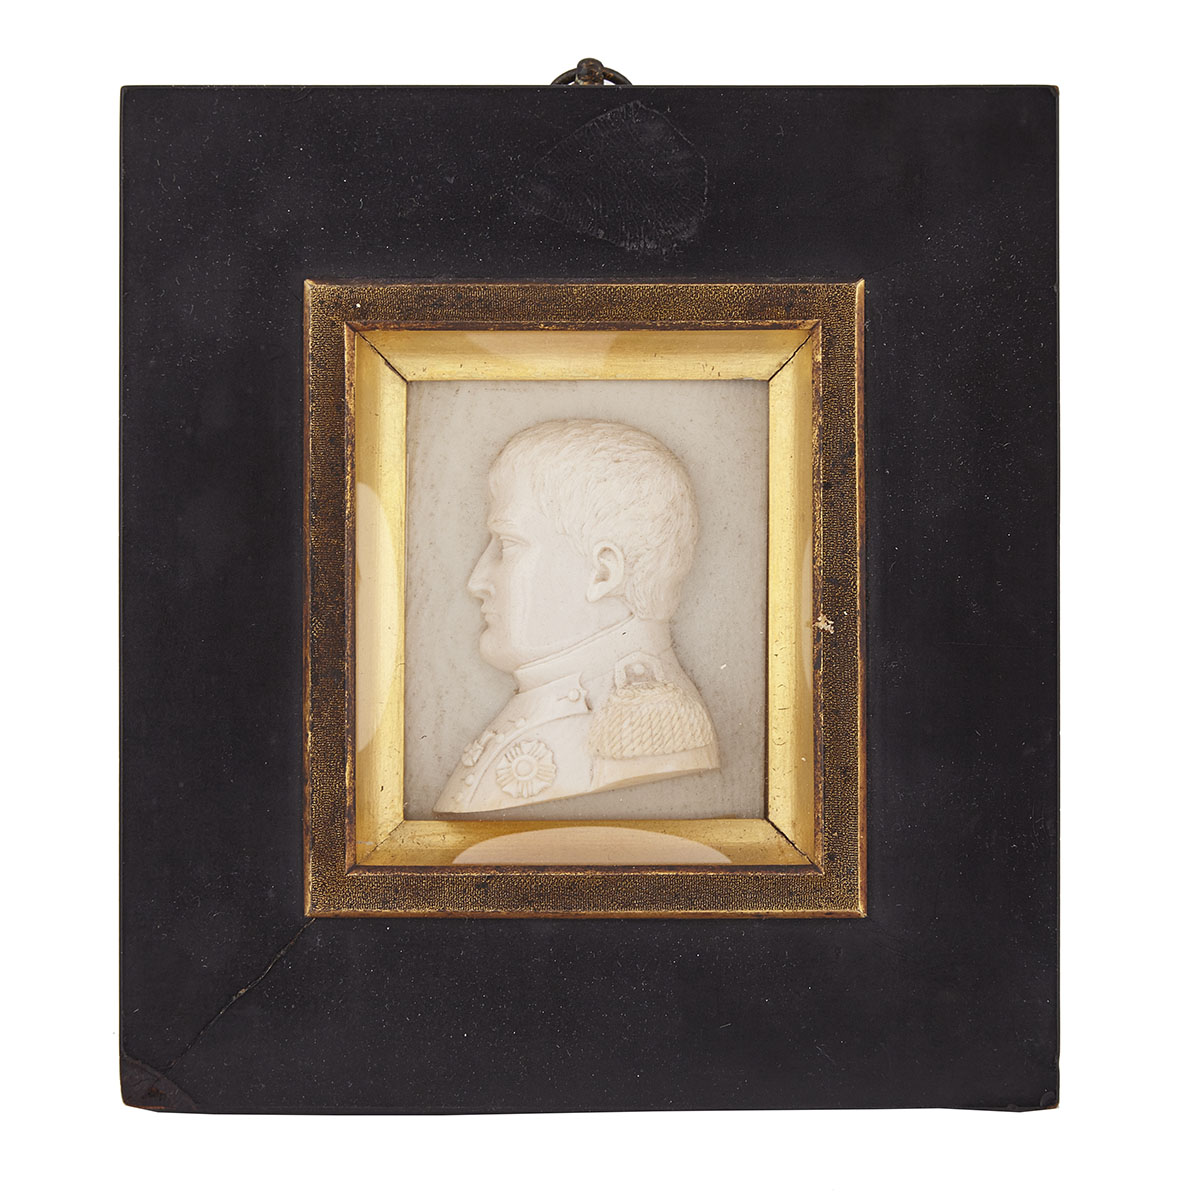 FRENCH  IVORY BAS RELIEF CARVED PORTRAIT OF NAPOLEON, MID 19TH CENTURY